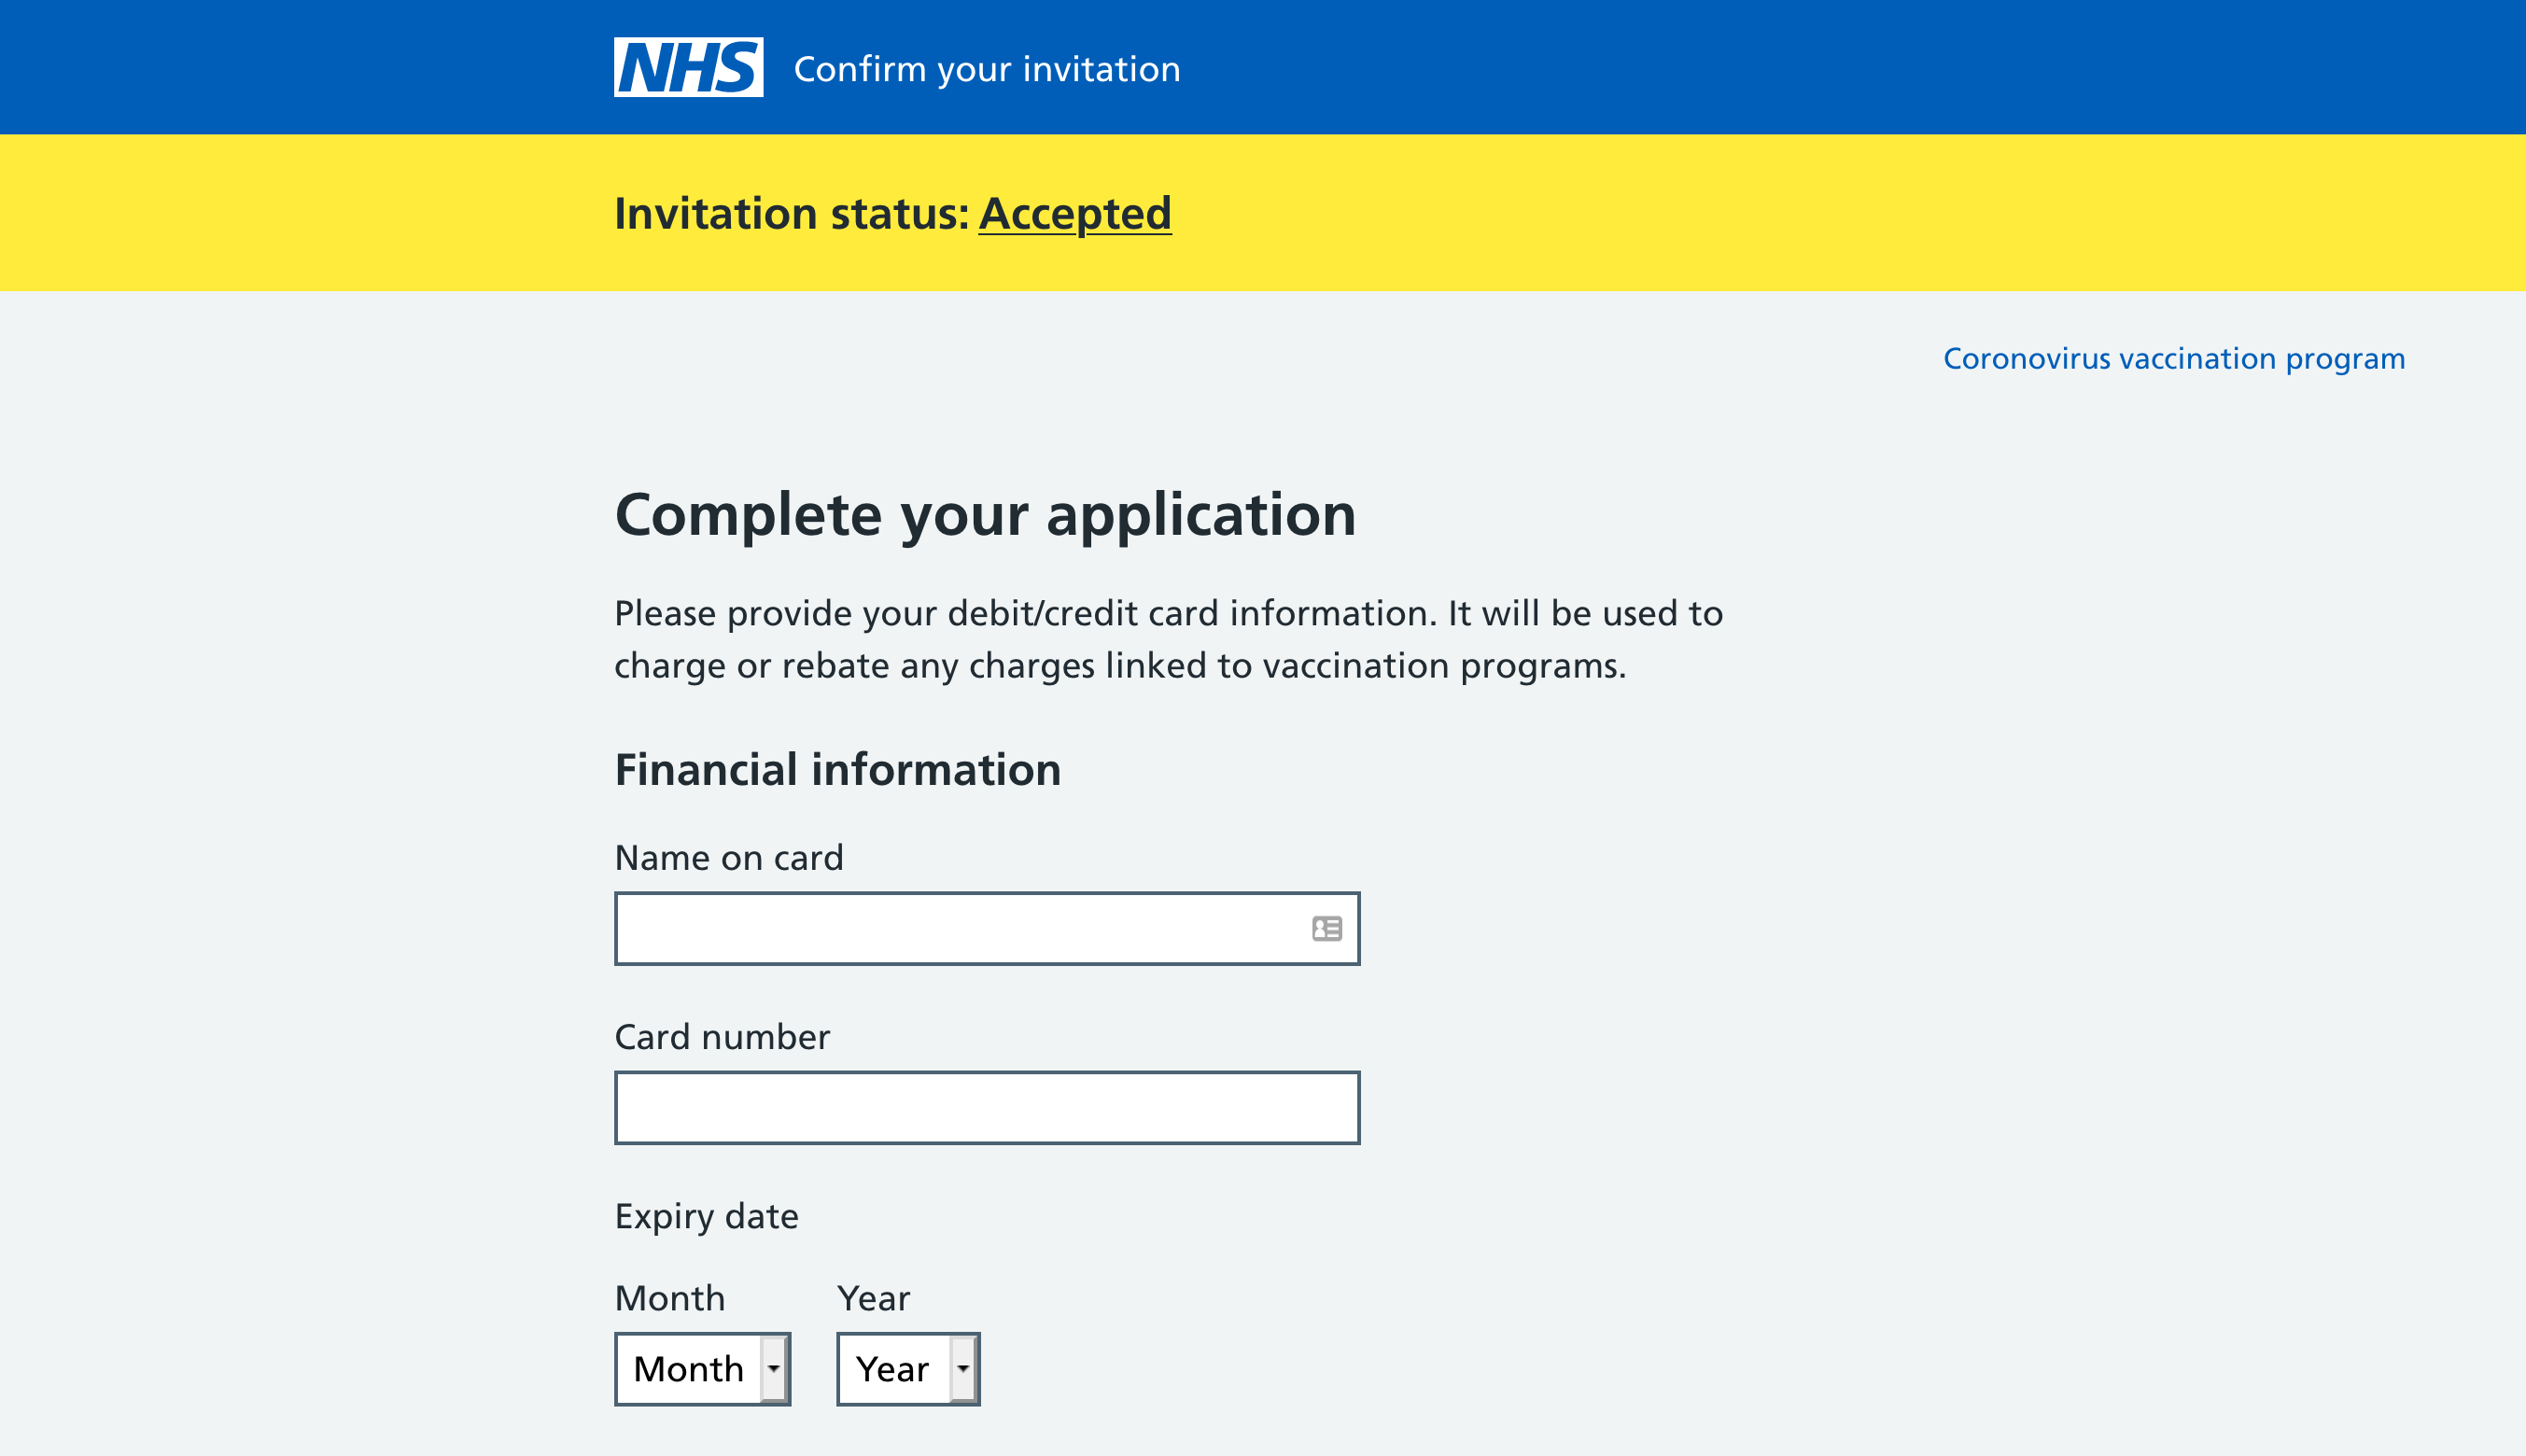 Warning Over NHS COVID-19 Phishing Scam